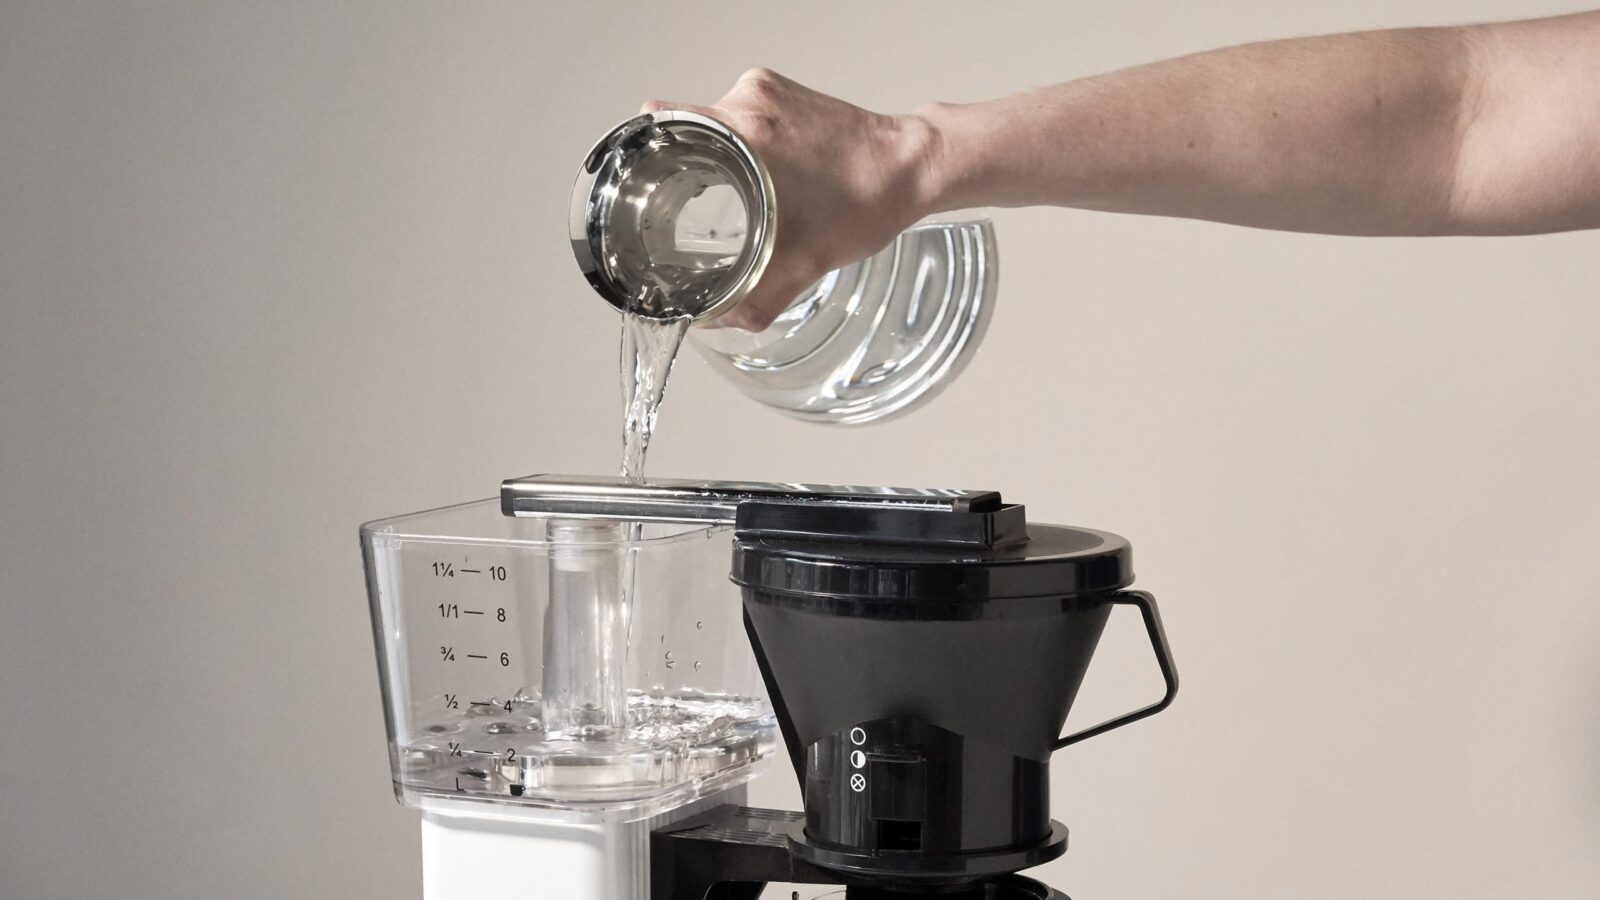 01 TRD20 Coffee Maker Water scaled - Tea Cup